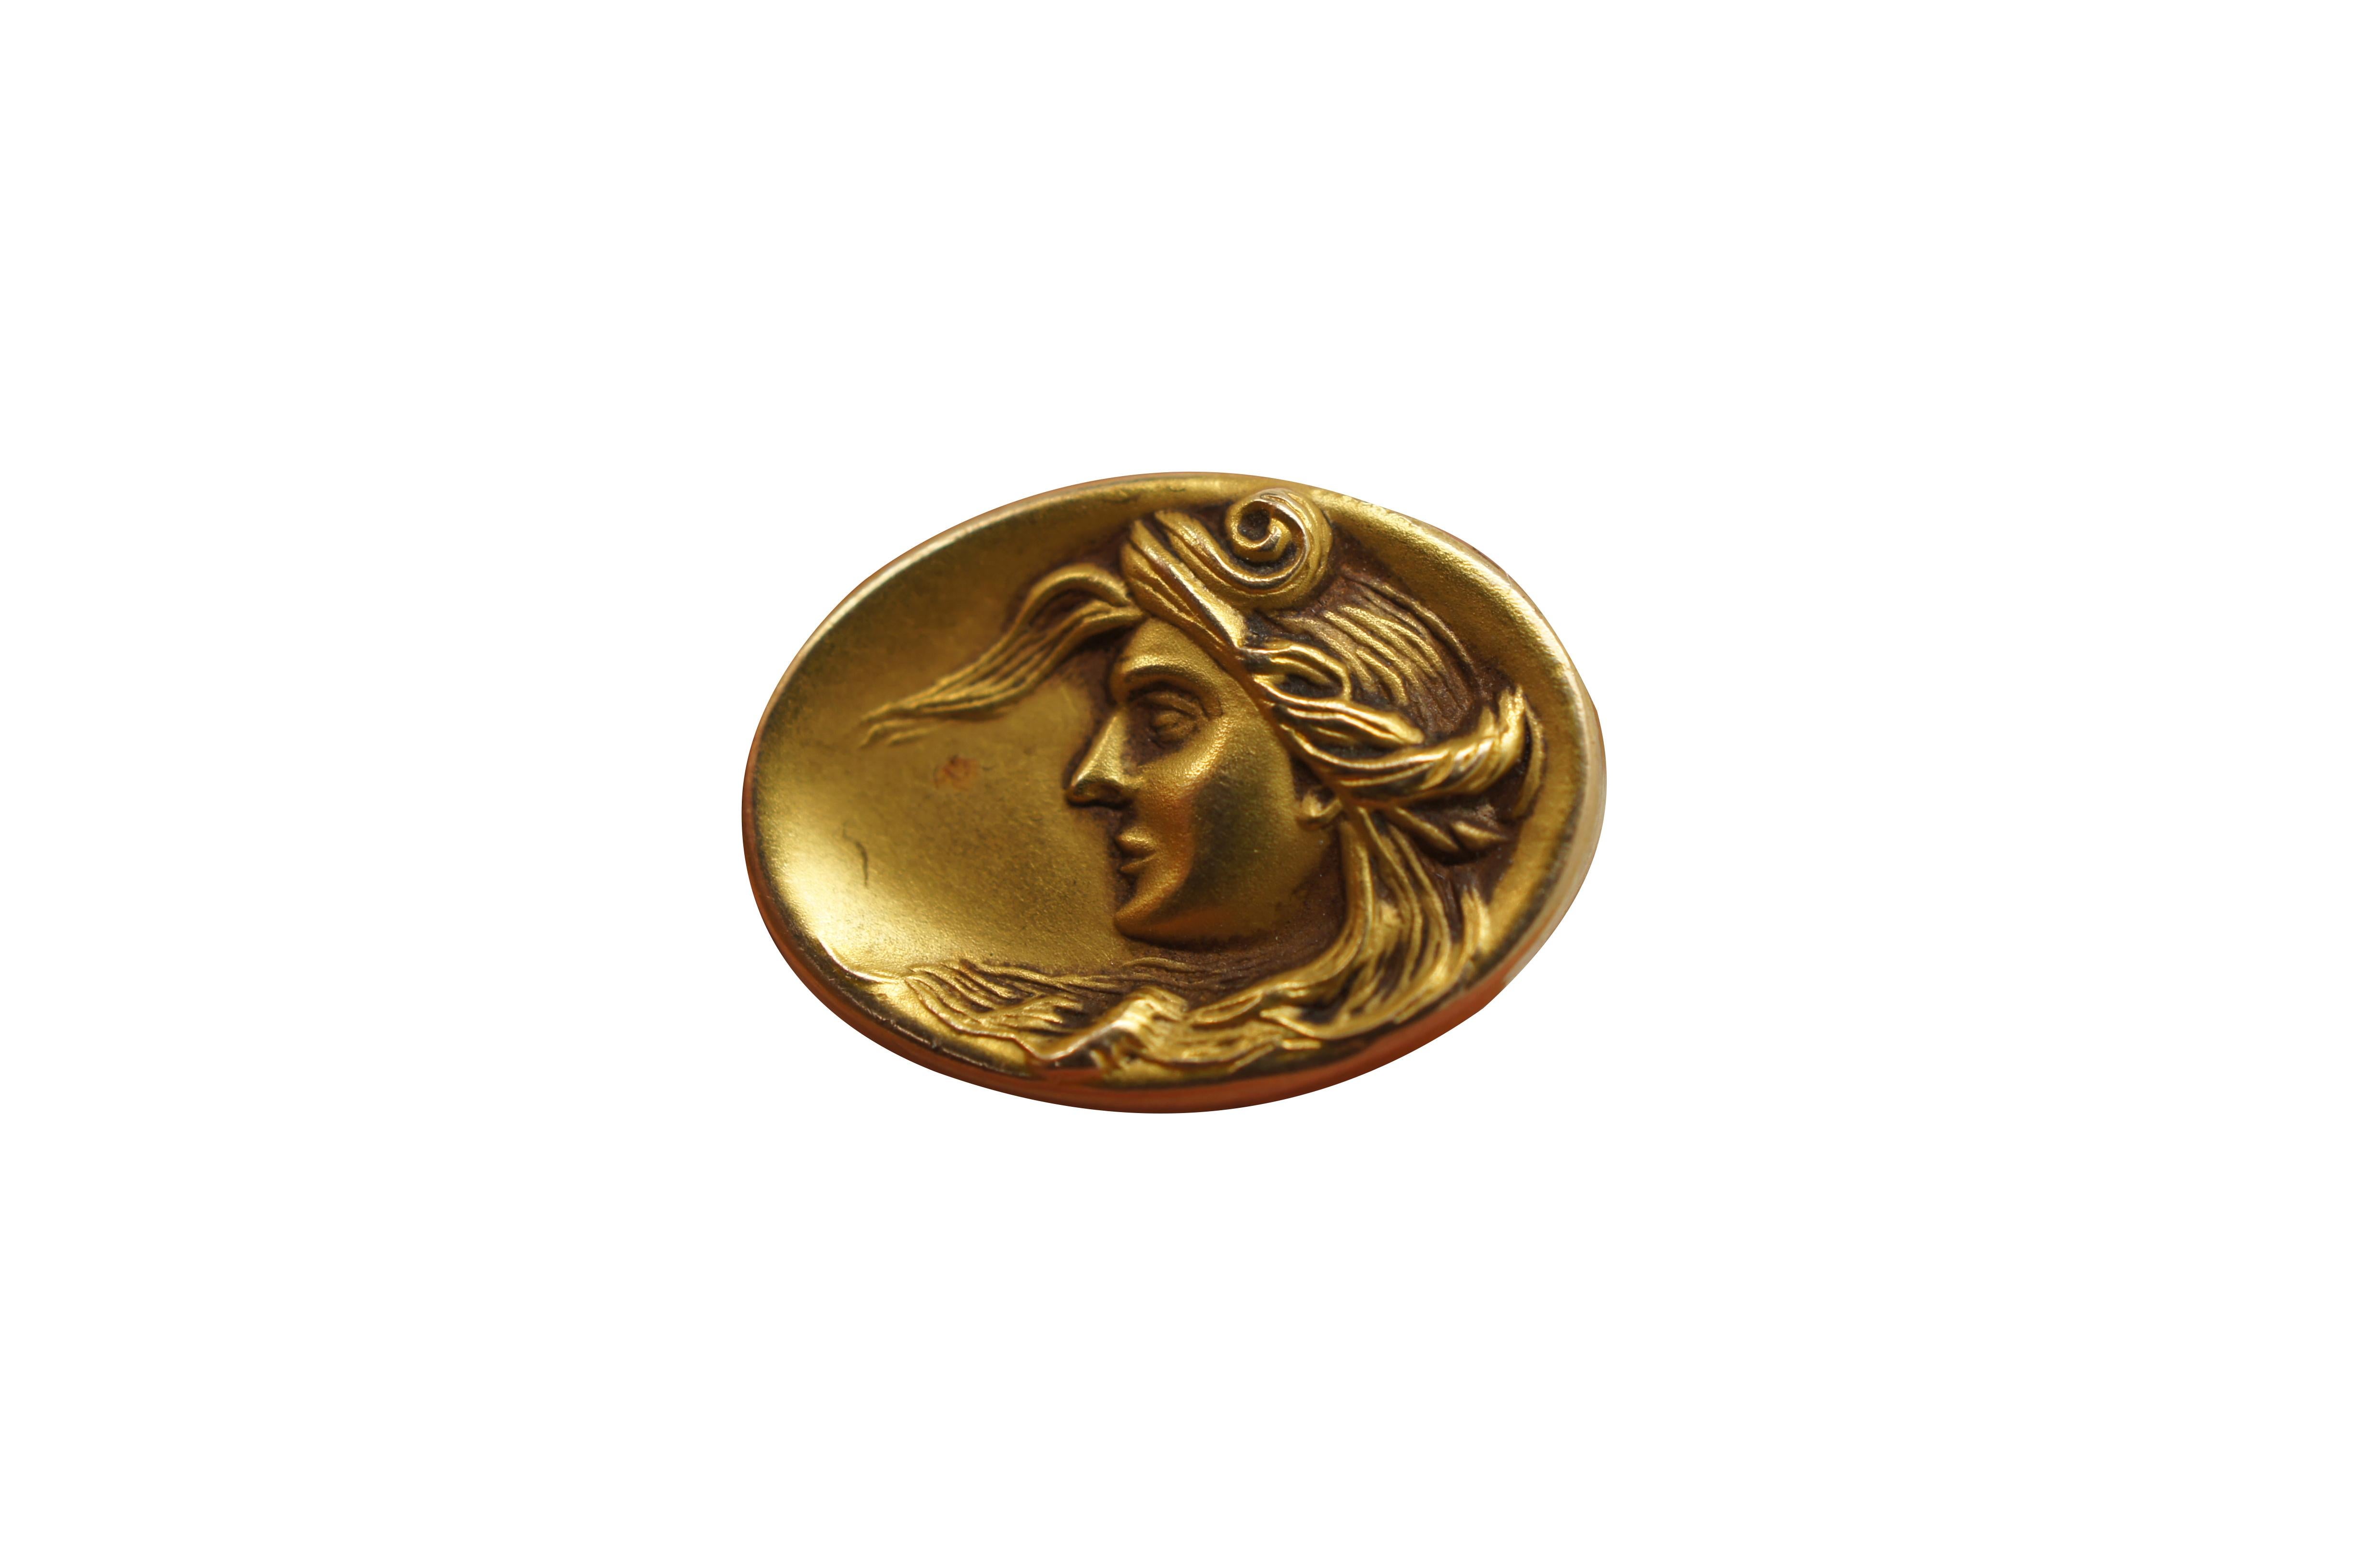 Antique Art Nouveau 10k gold cufflinks featuring oval form with a female silhouette face.

Dimensions: 
0.625